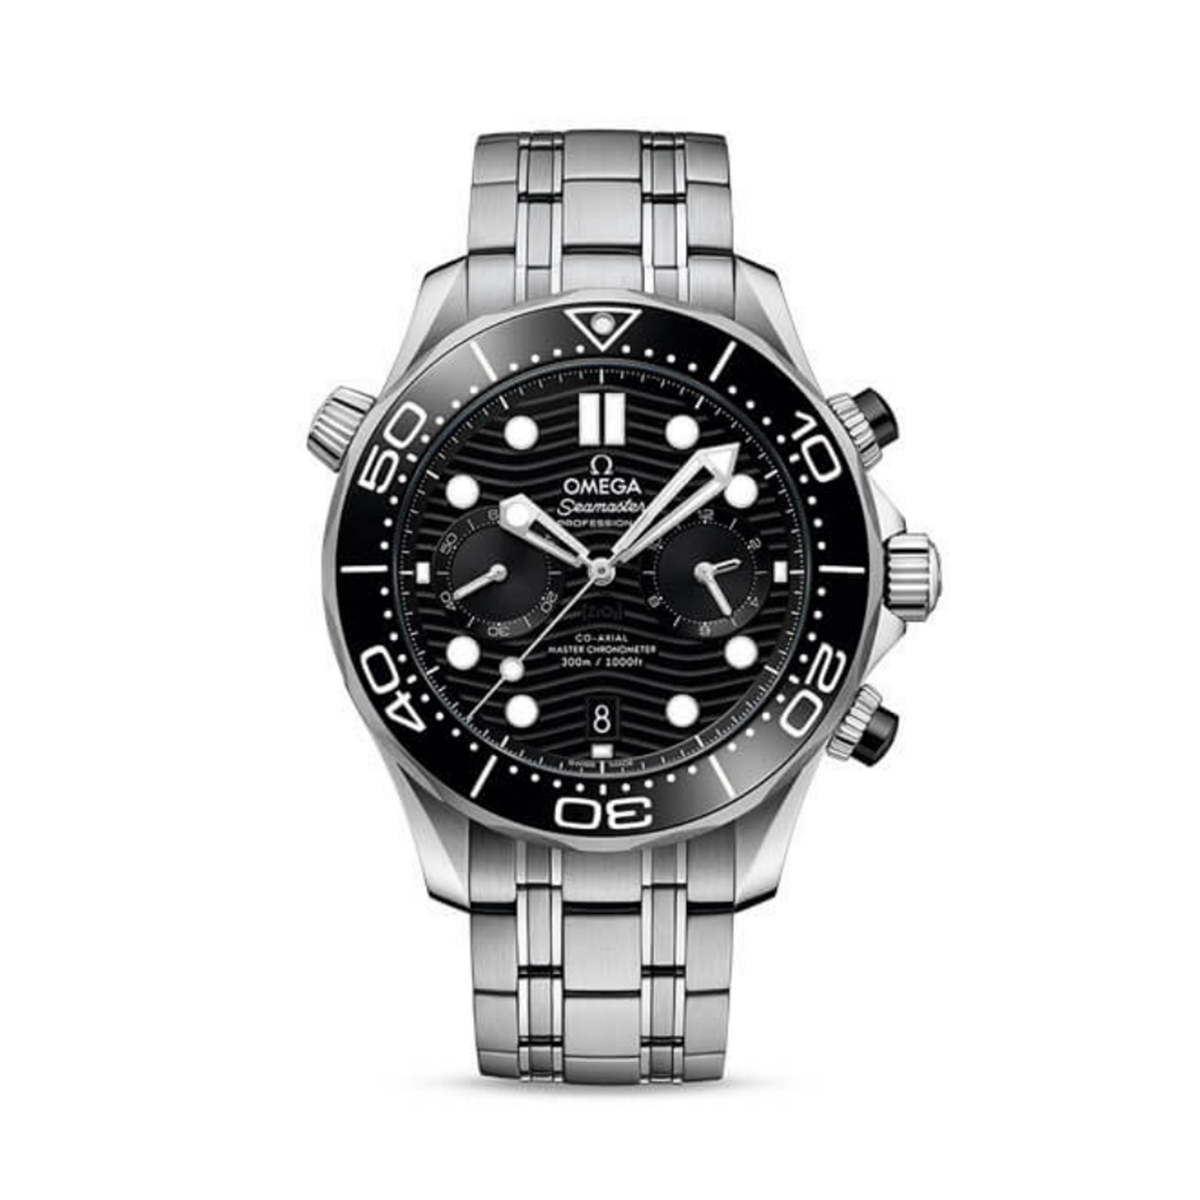 Seamaster Diver 300M Co-Axial Master Chronometer 44mm Watch